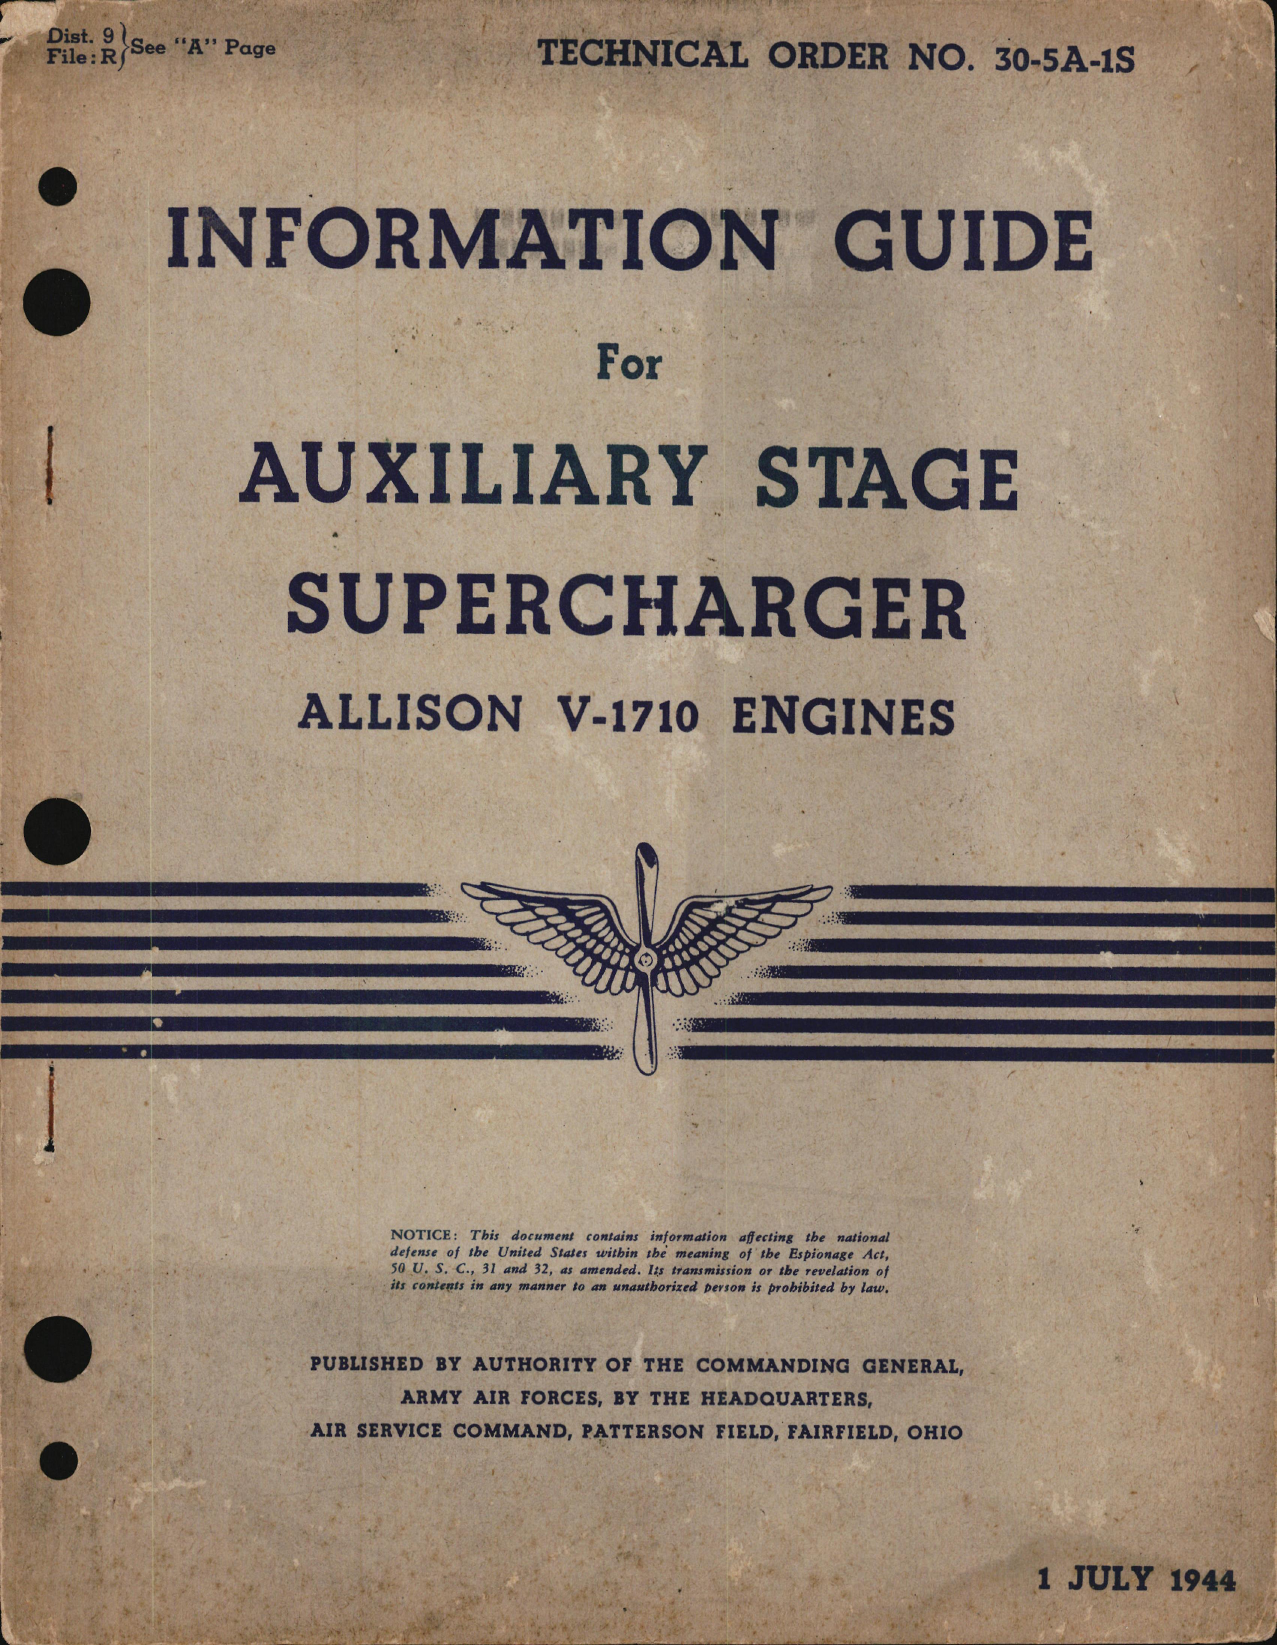 Sample page 1 from AirCorps Library document: Information Guide for Auxiliary Stage Supercharger for V-1710 Engines